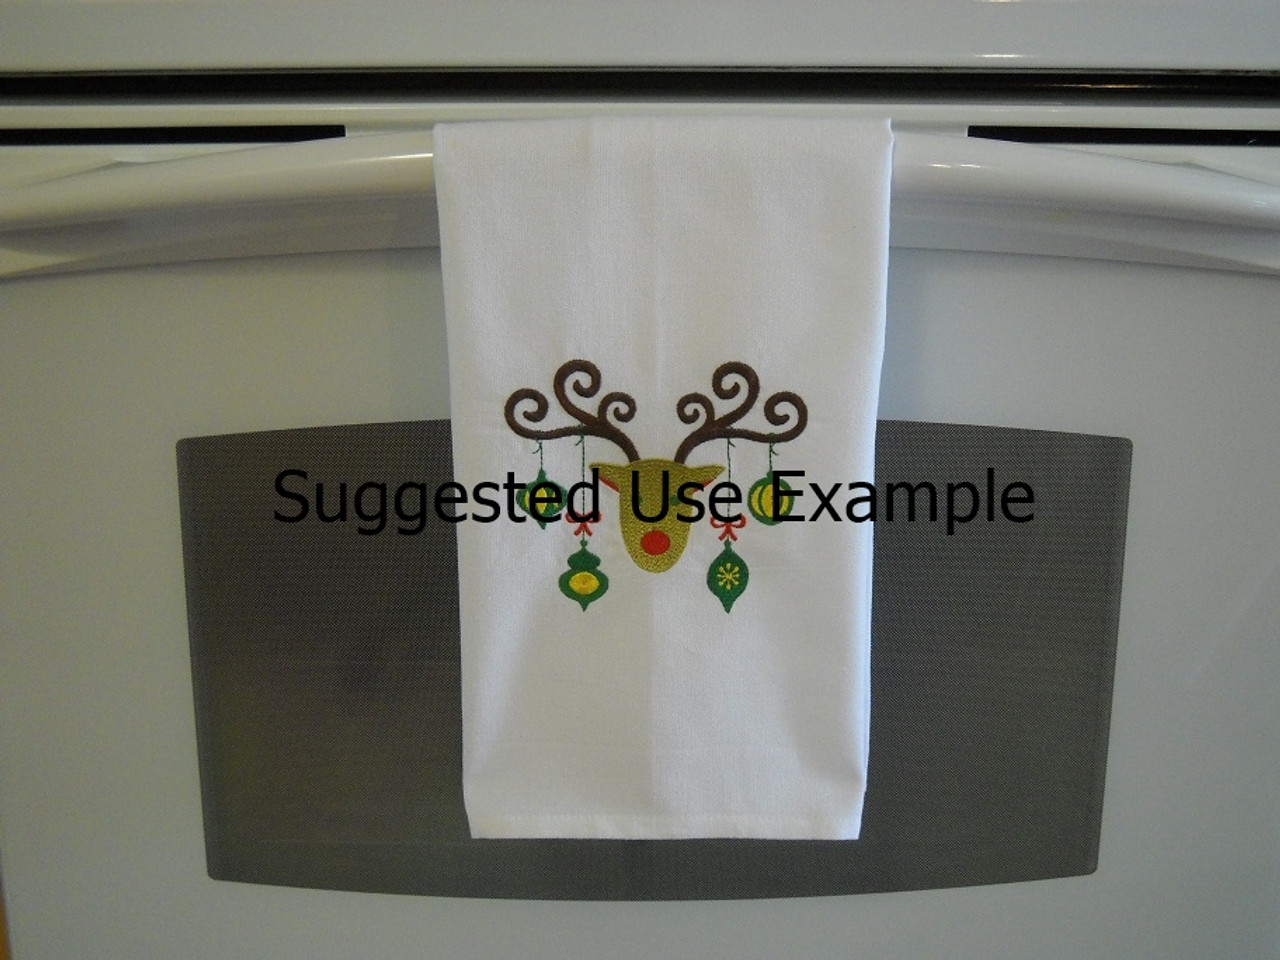 Horn - Kitchen Towel - 20" x 28"
Embroidery on a cream colored towel.
100% Cotton with loop, for optional hanging.
Machine washable in cool water and tumble dry at low temperature.
Minimal shrinkage.
Size: 20" x 28"